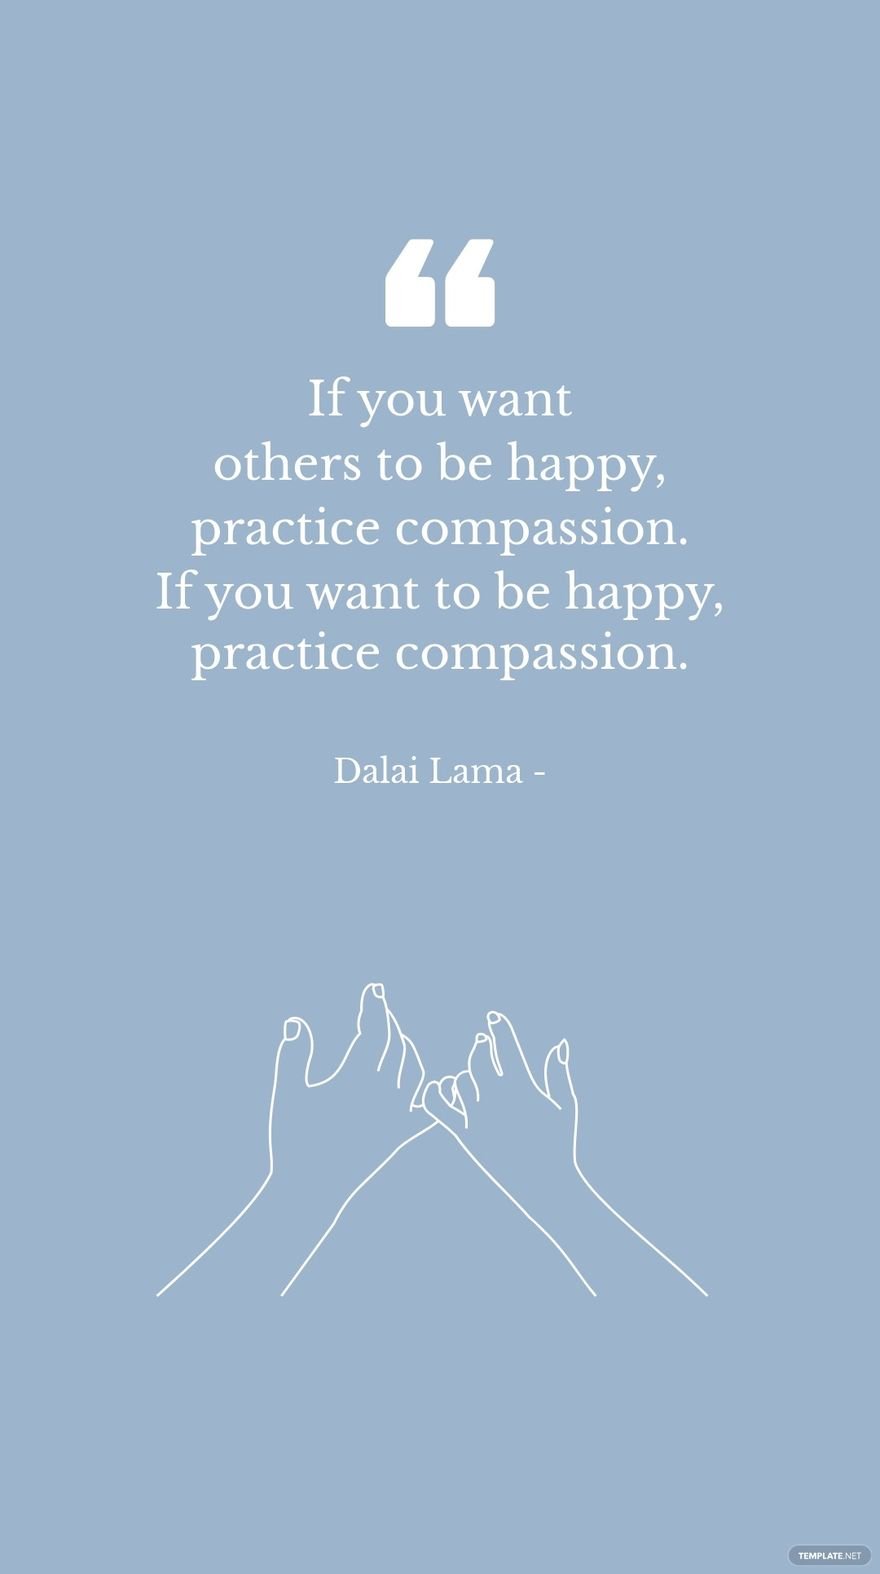 Dalai Lama - If you want others to be happy, practice compassion. If you want to be happy, practice compassion.